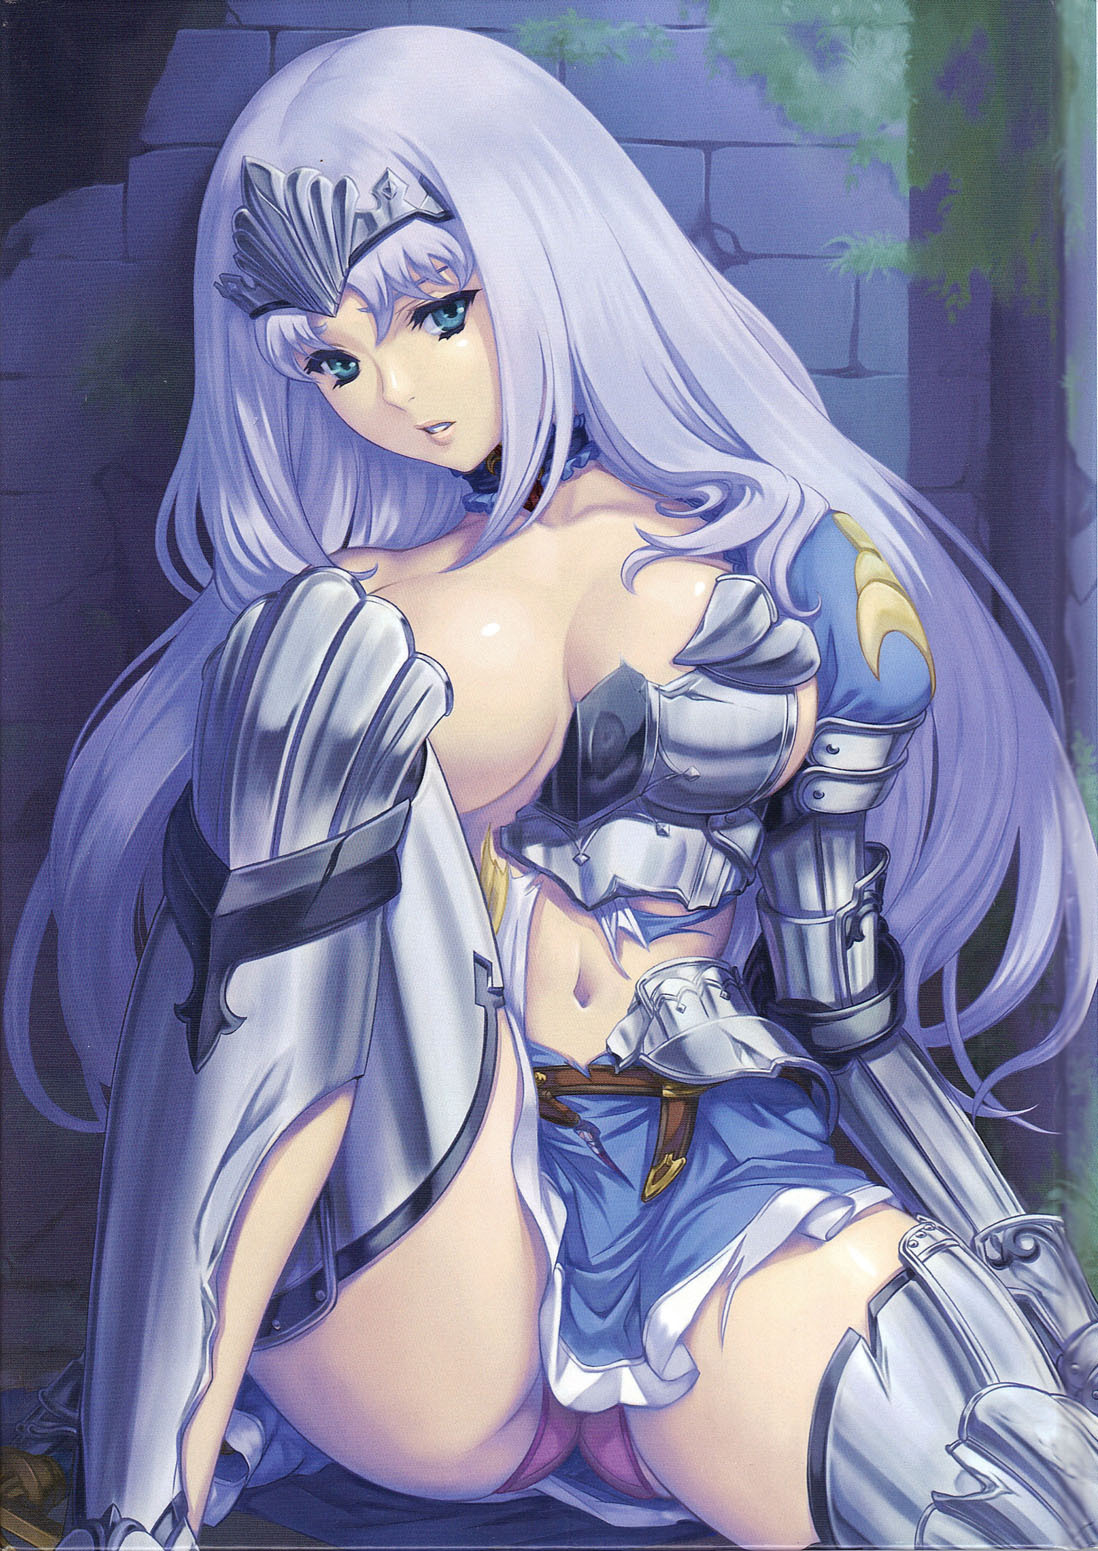 [Various] Vanquished Queens Visual Book (Queen's Blade) [English] [leecherboy] page 30 full